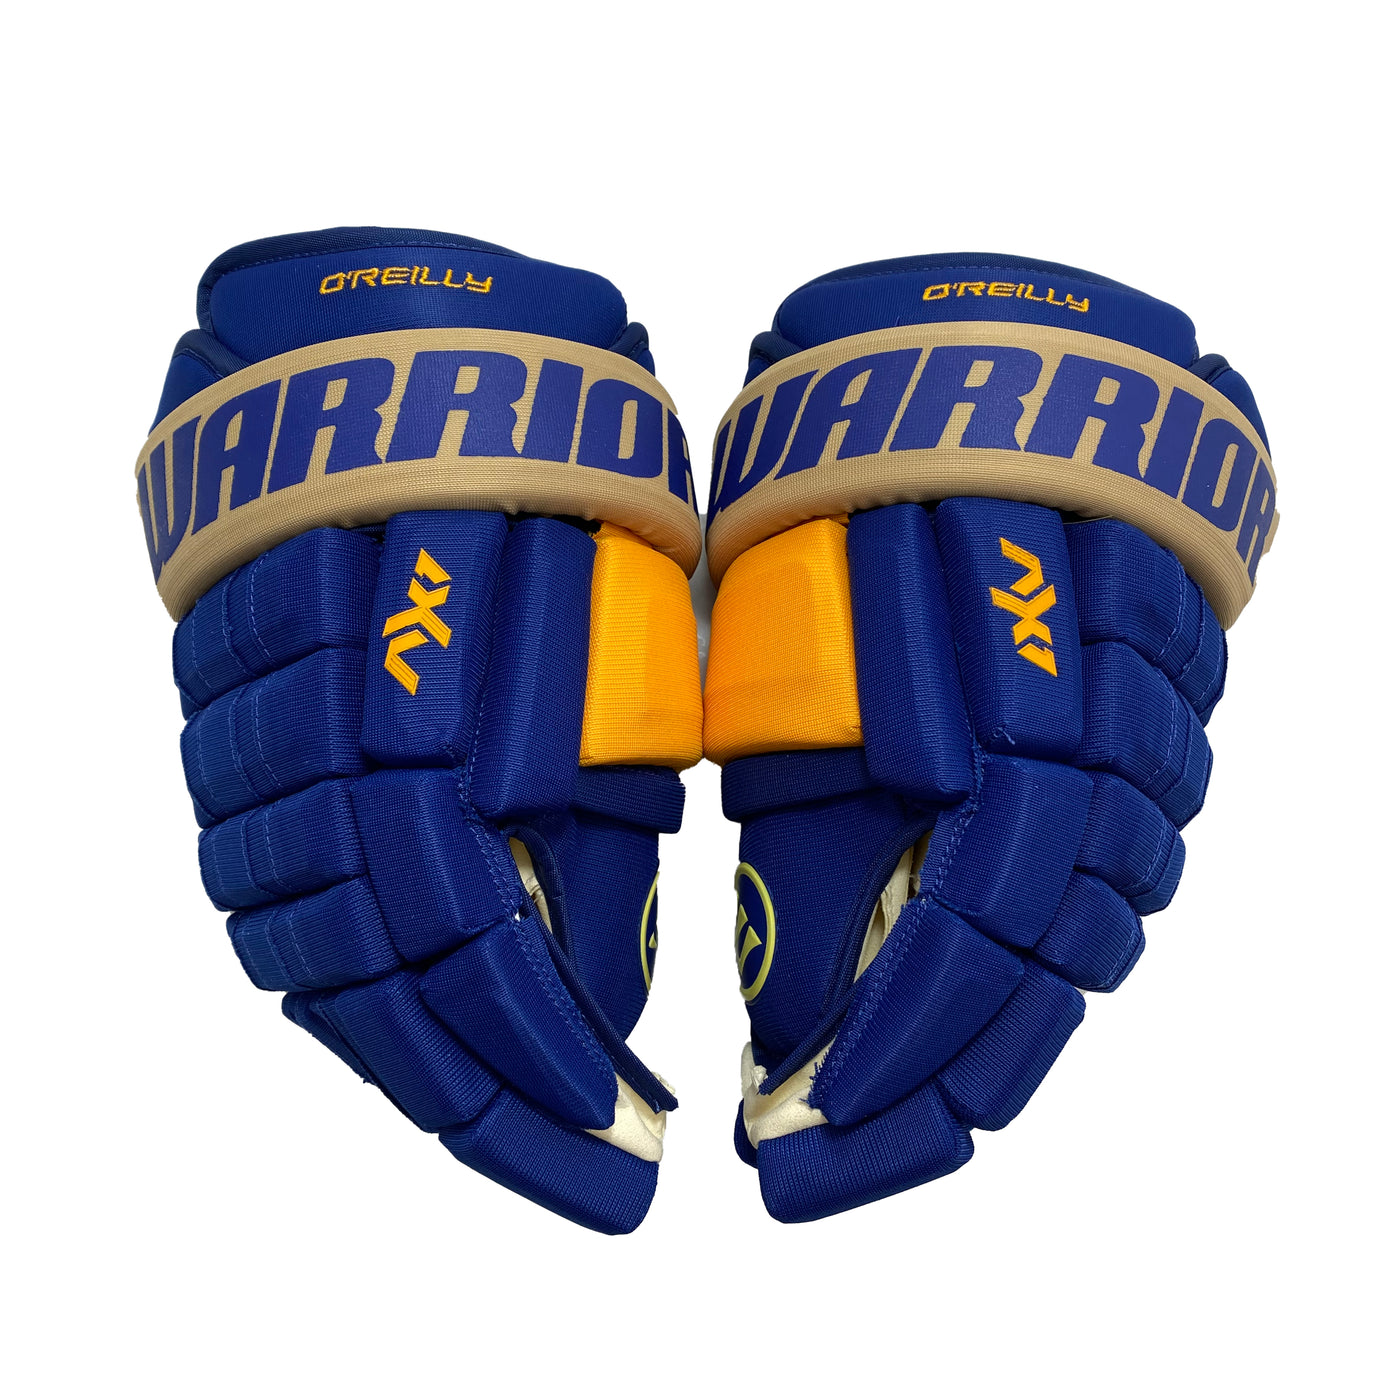 Warrior Franchise - St.Louis Blues - Winter Classic Pro Stock Glove - Ryan O'Reilly